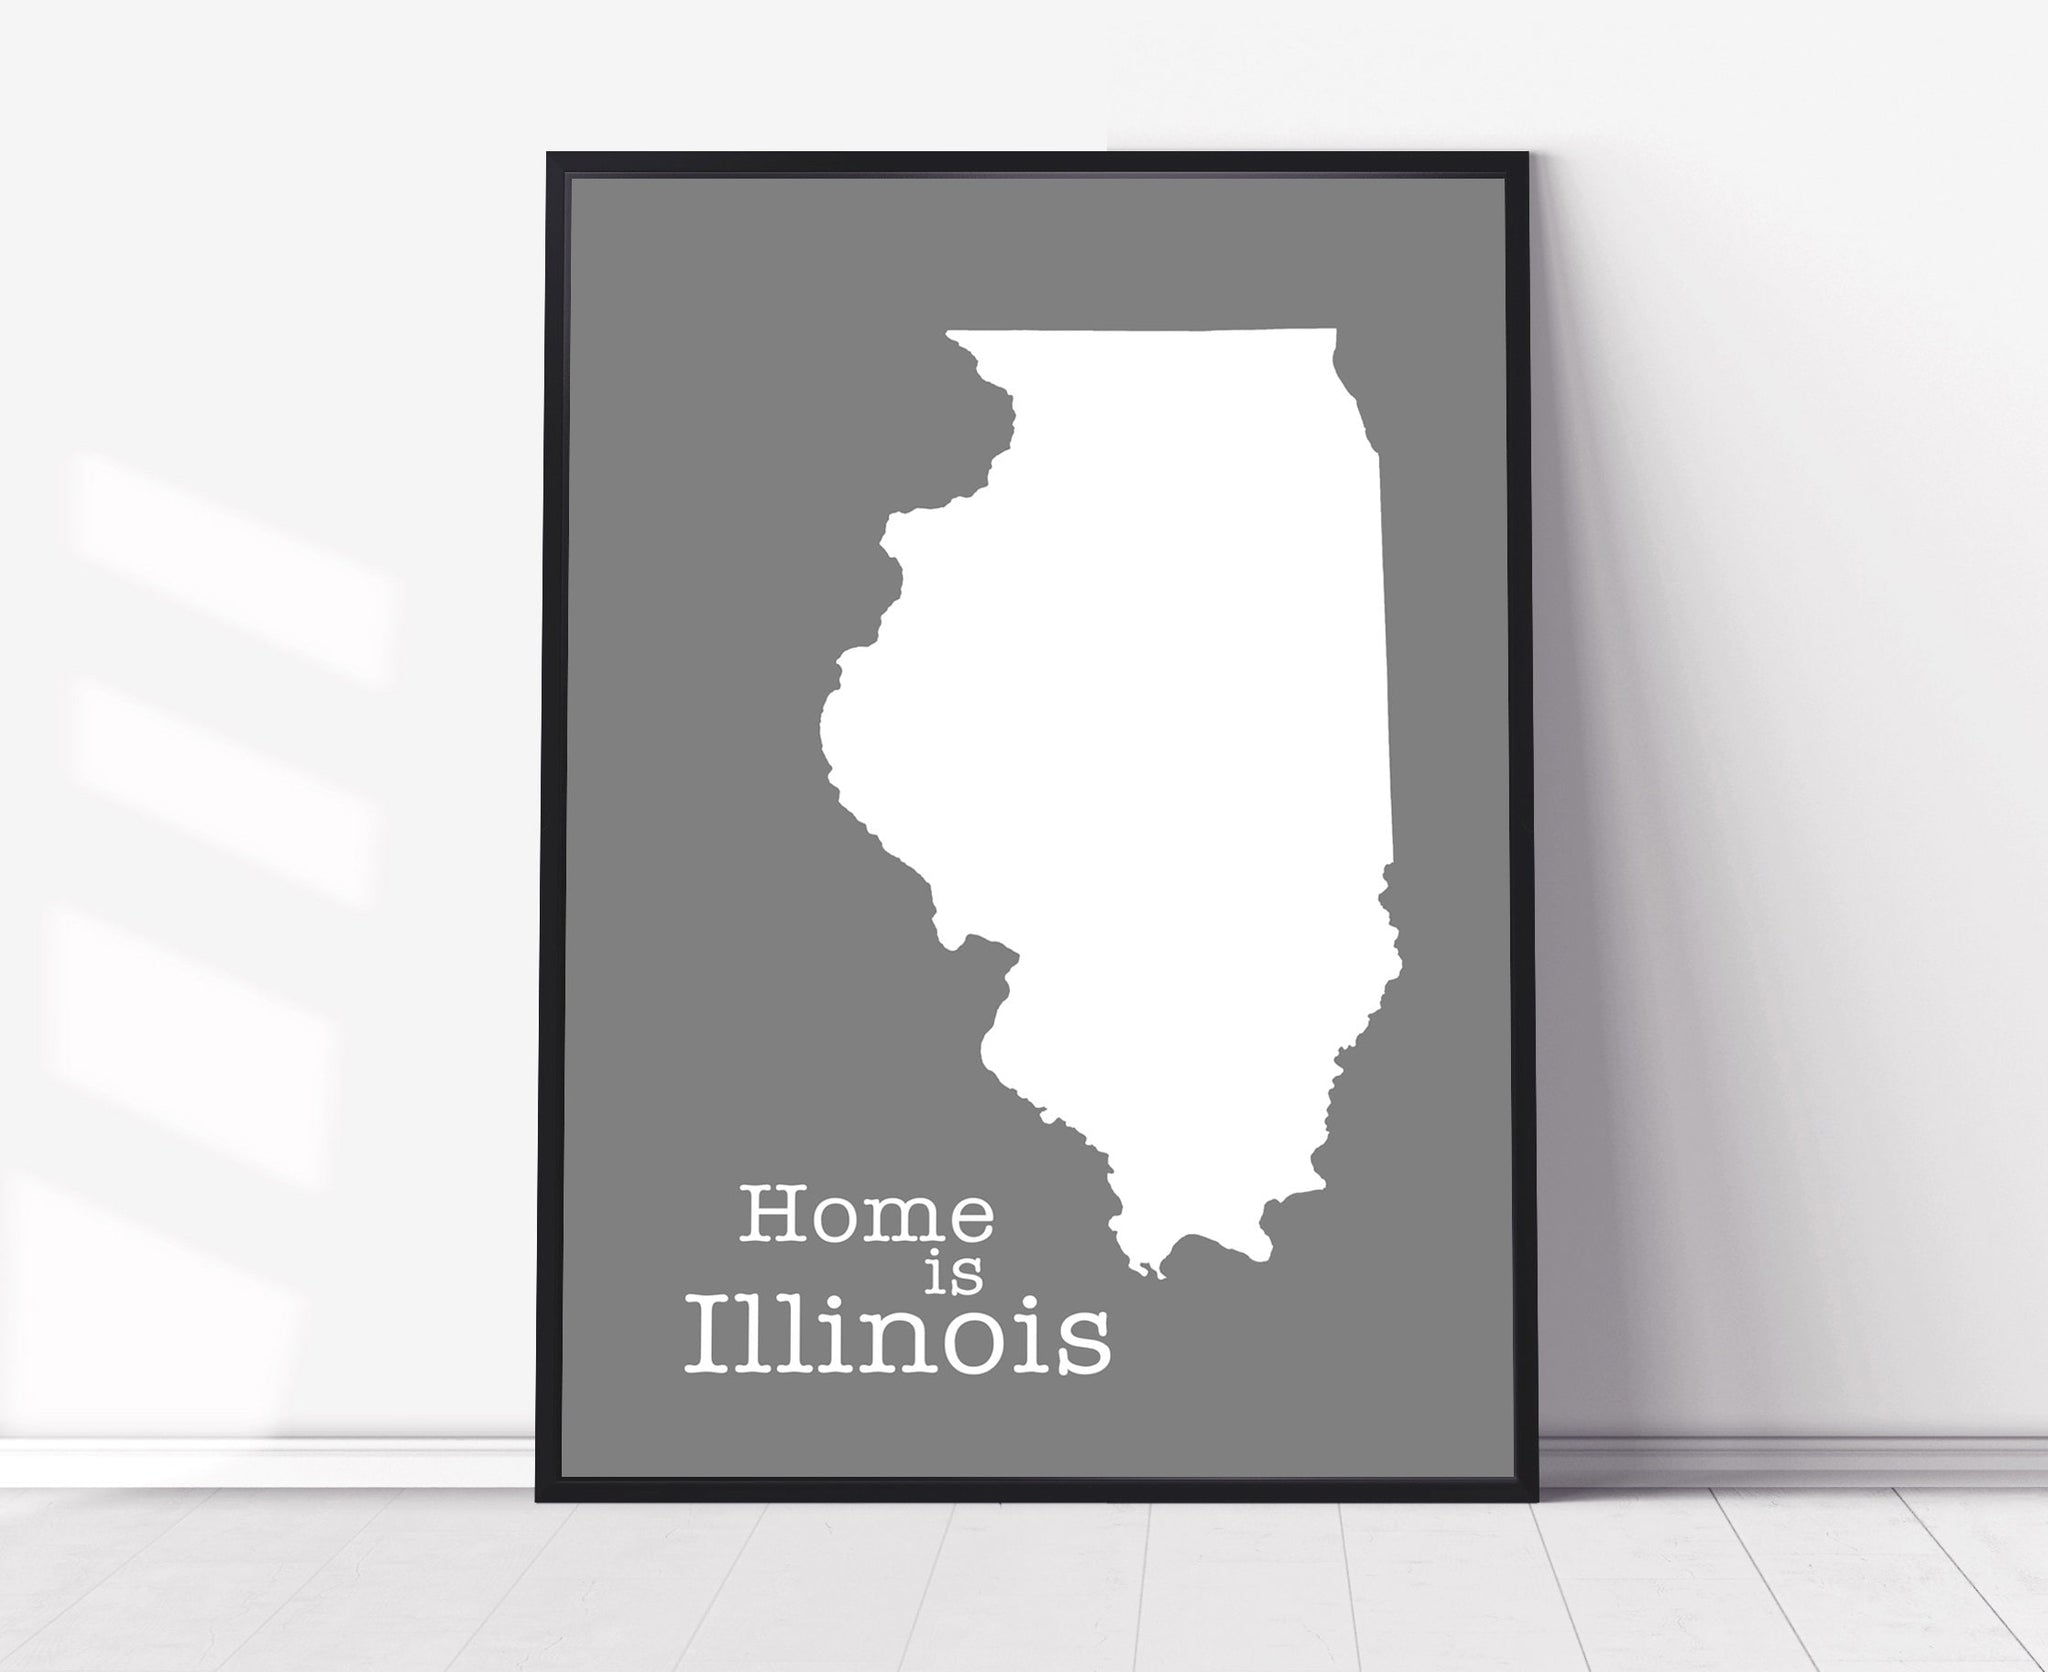 Illinois Map Wall Art, Illinois Map Poster Print, City map wall decor, Illinois State Poster, Home decor, Office decor, Family room decor